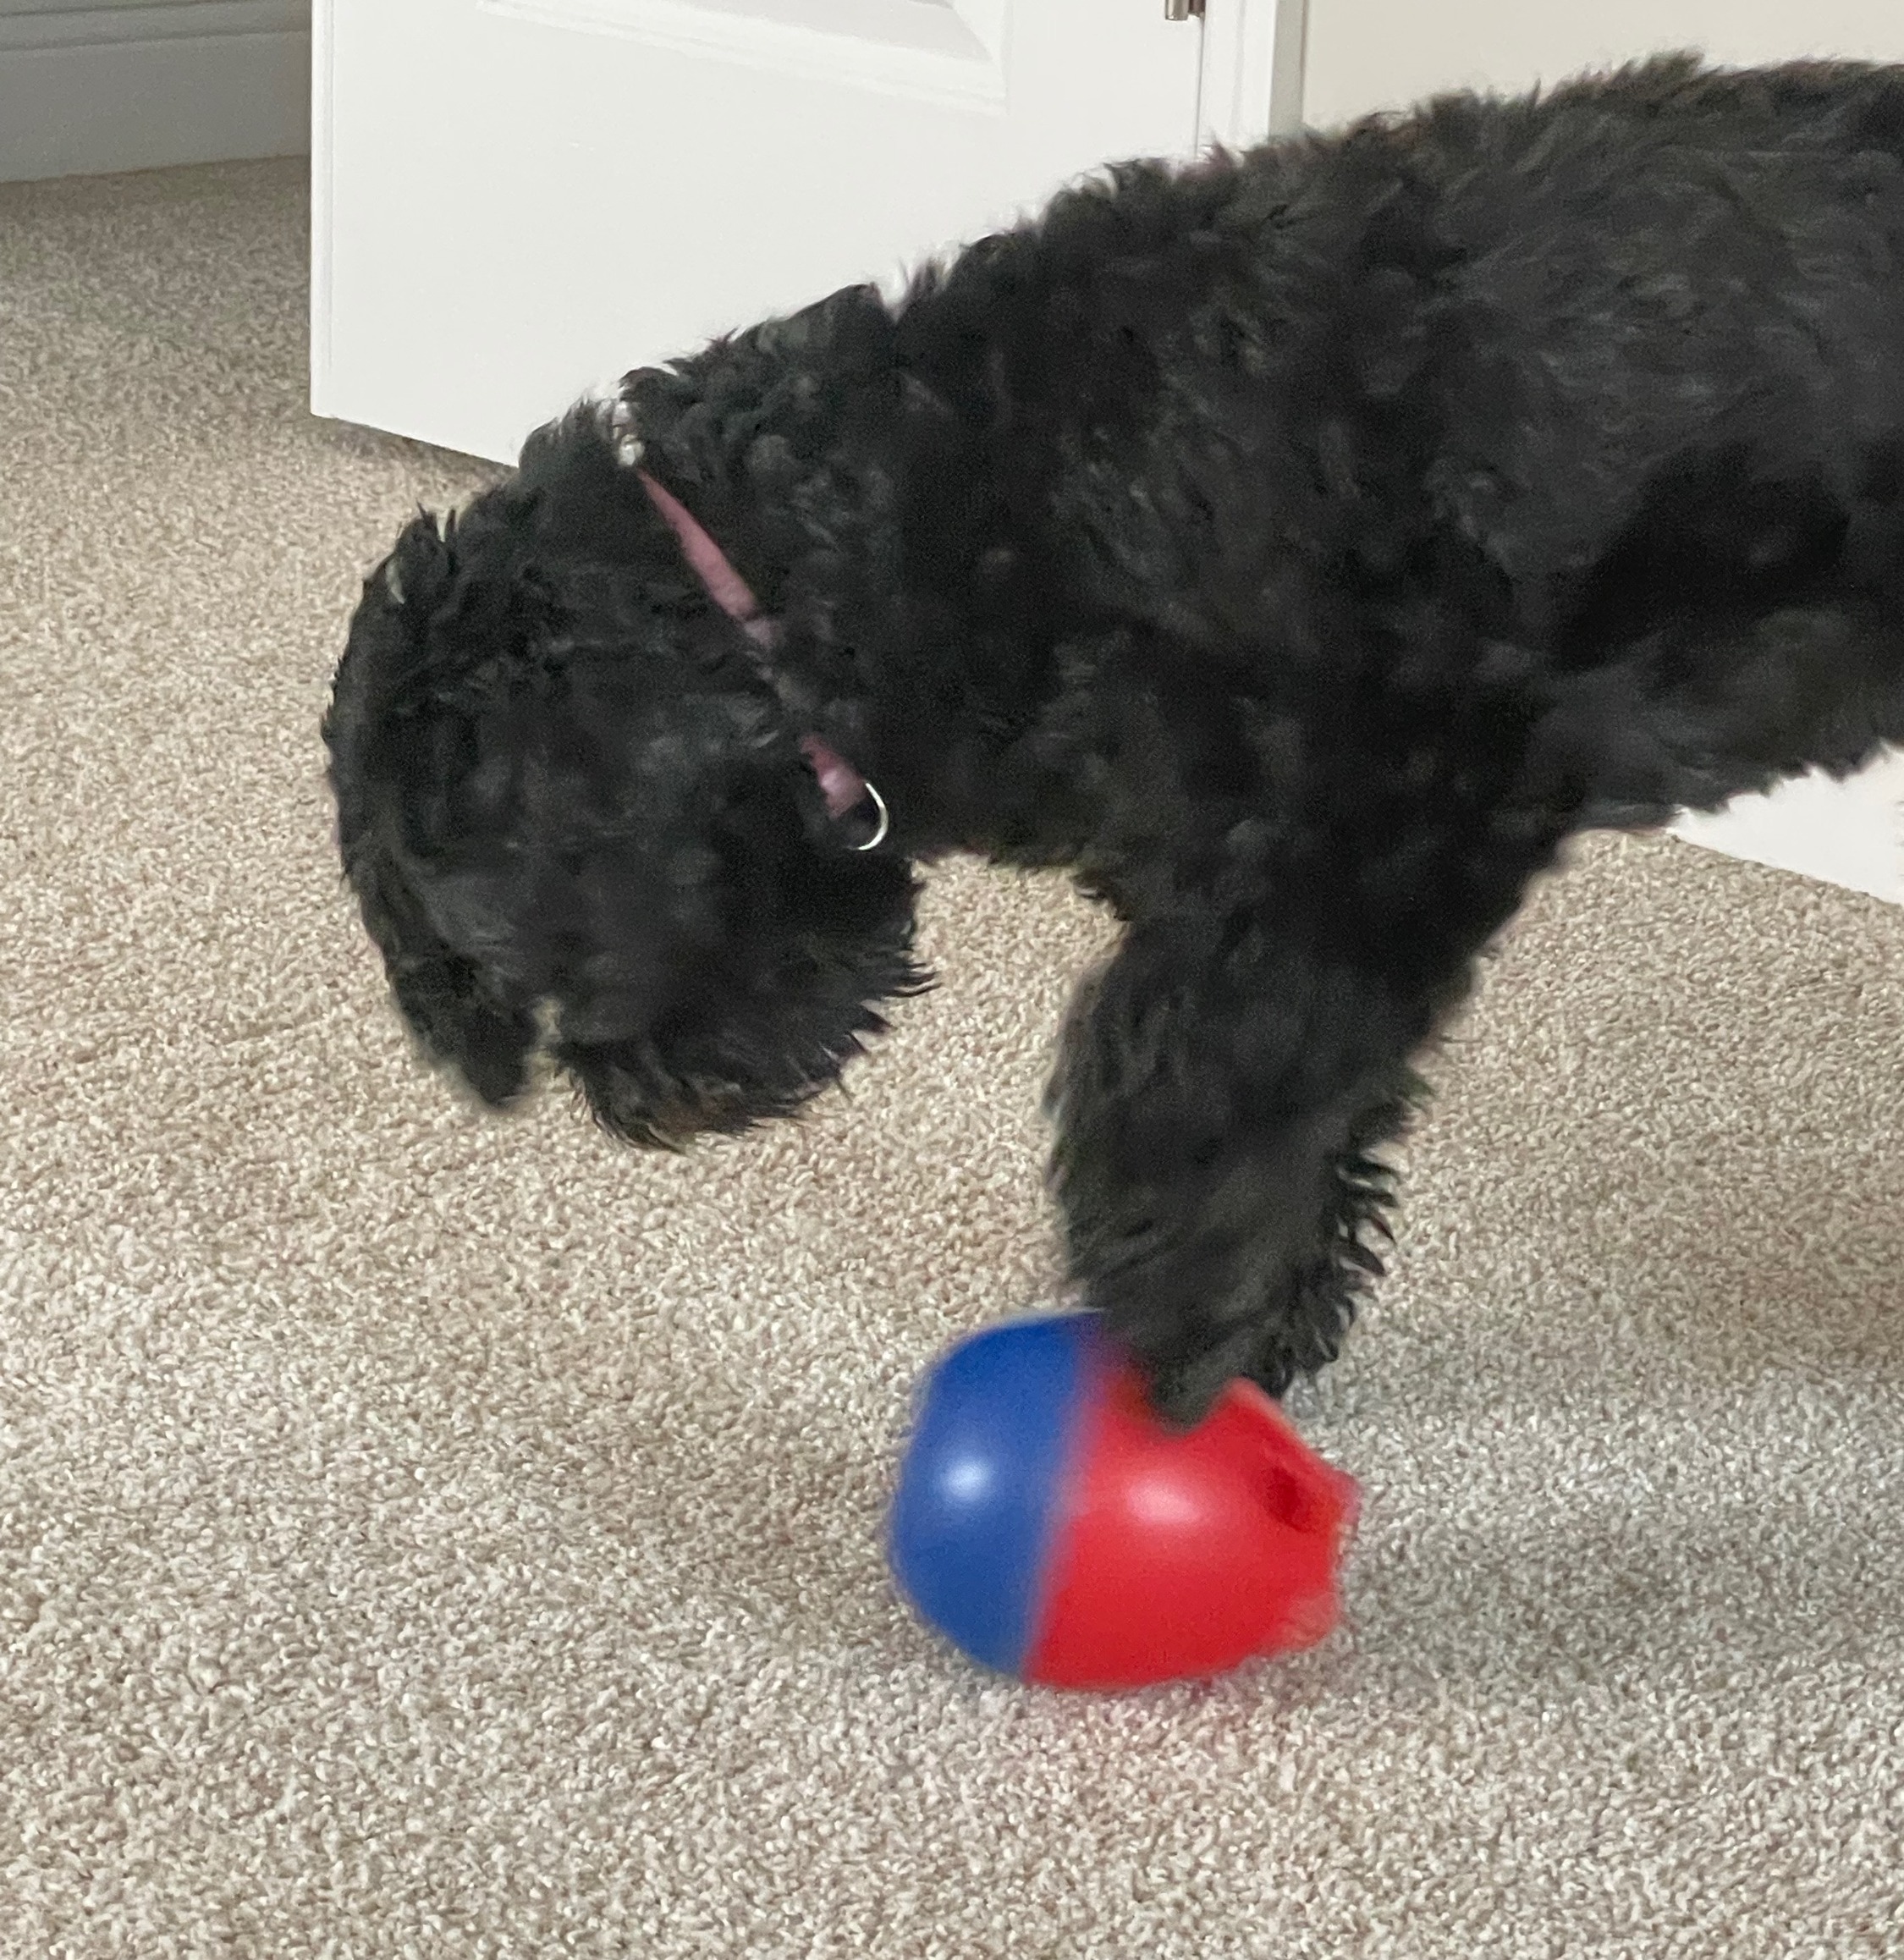 Dog playing with wobble toy